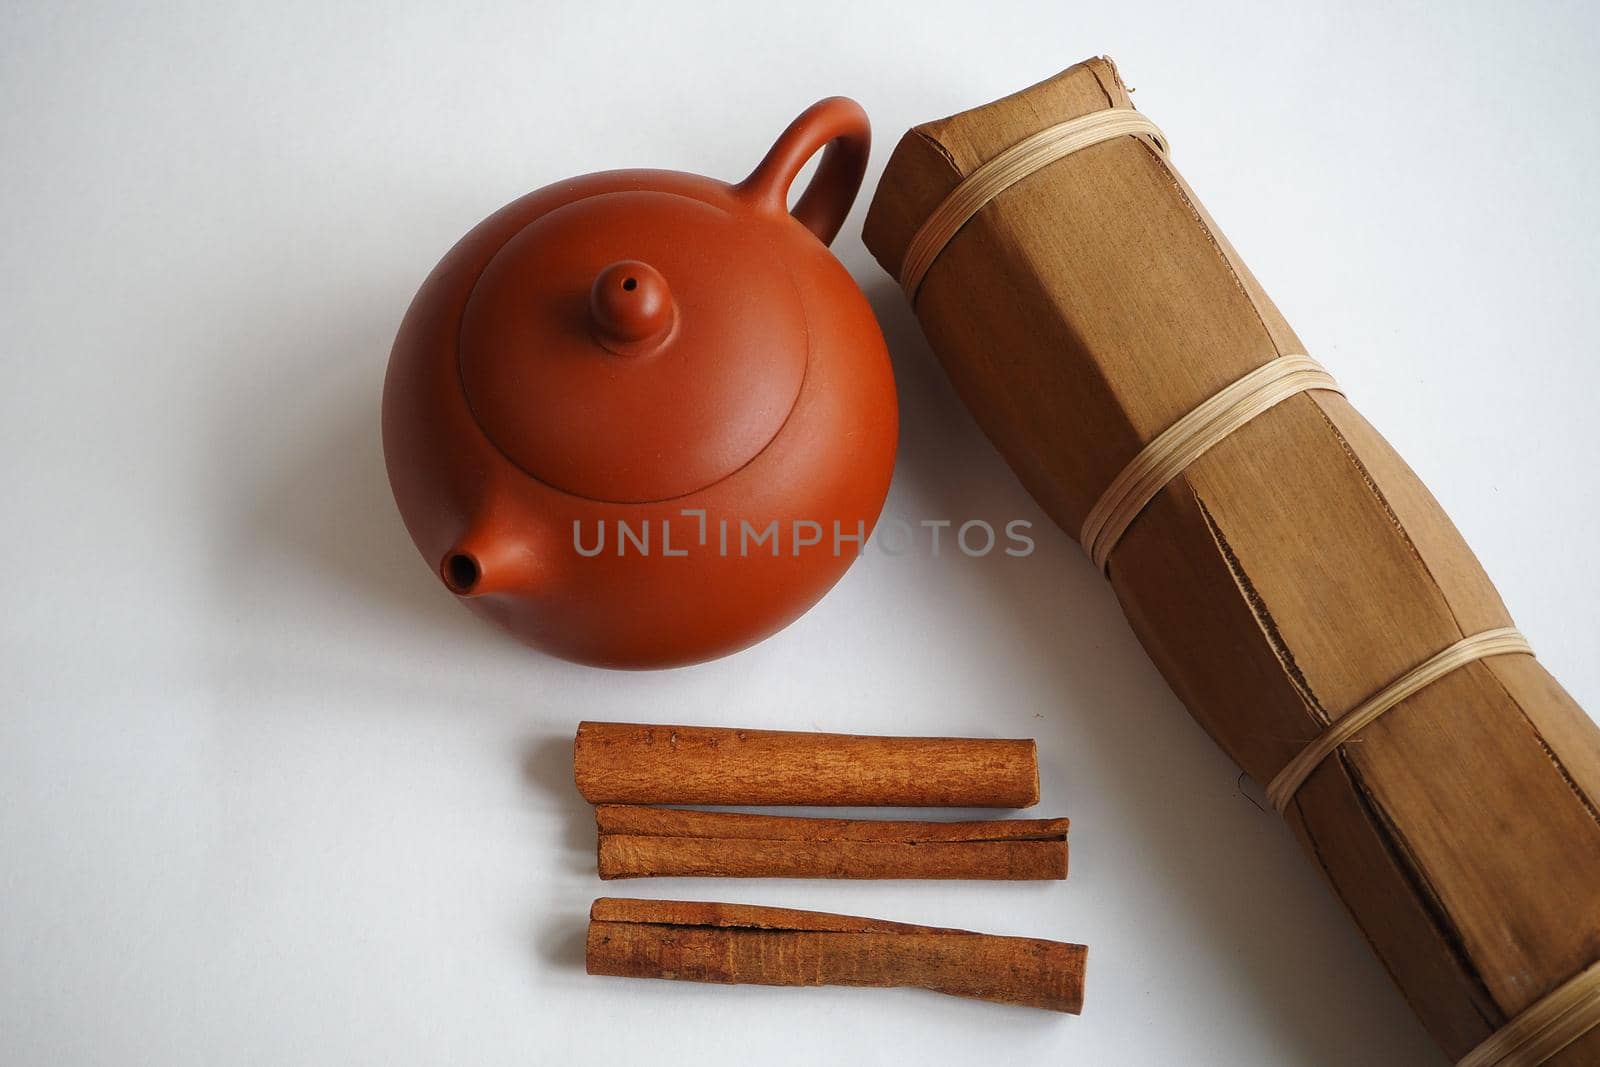 Chinese clay teapot for a tea ceremony with cinnamon sticks and dried herbs on a white background.